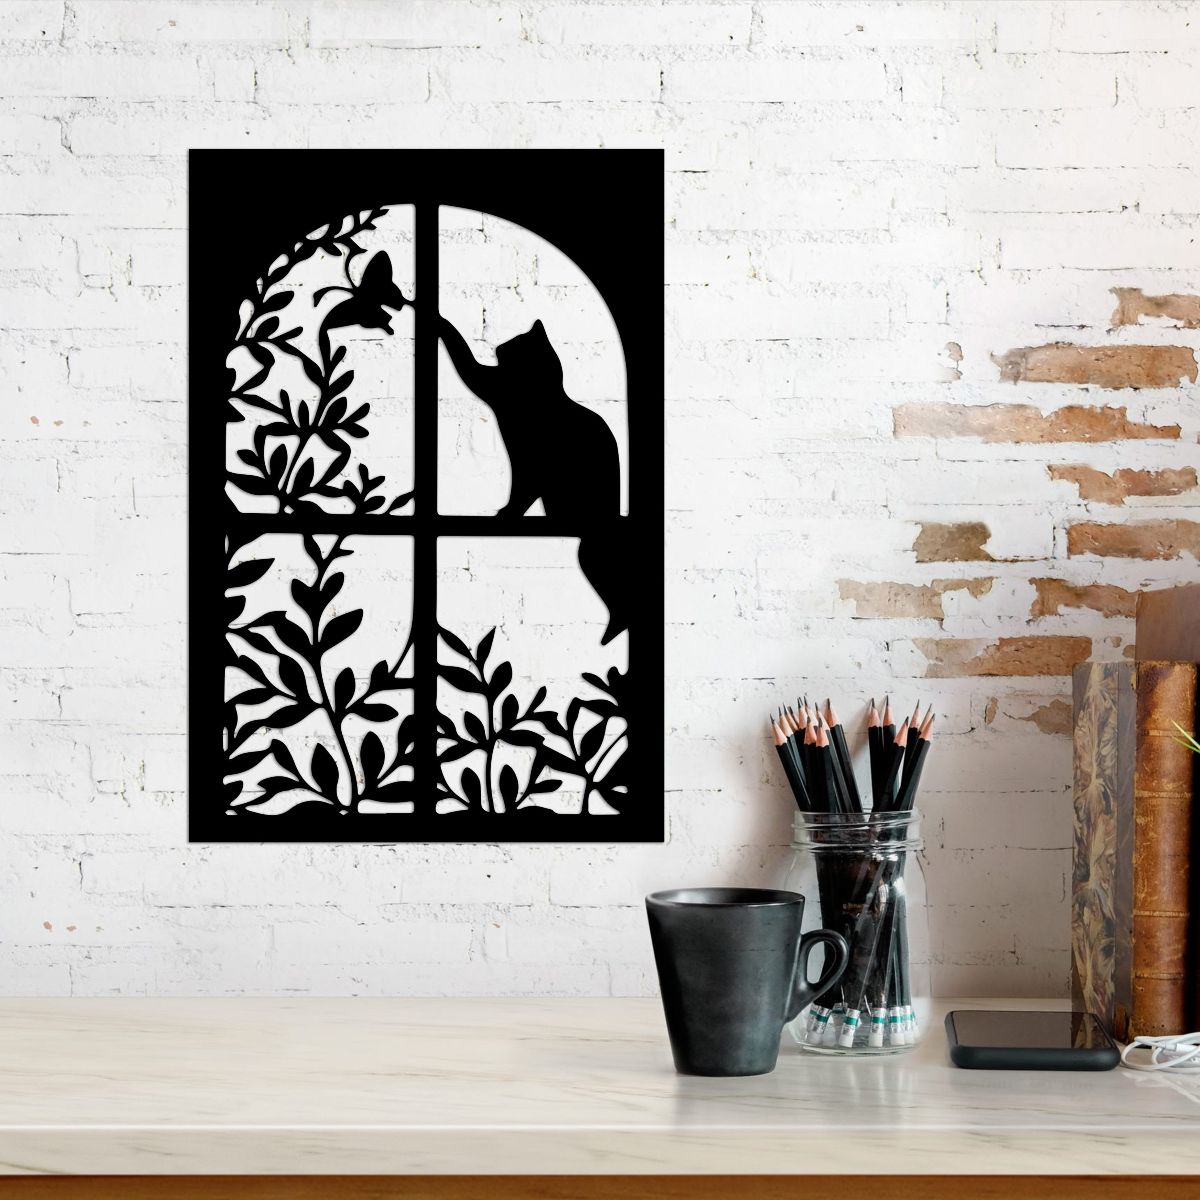 Cat And Butterfly In Window Metal Wall, Hanging Art, Garden Decor, Black Cat Metal Signs, House Decor, Gift For Cat Lover, Wall Hanger